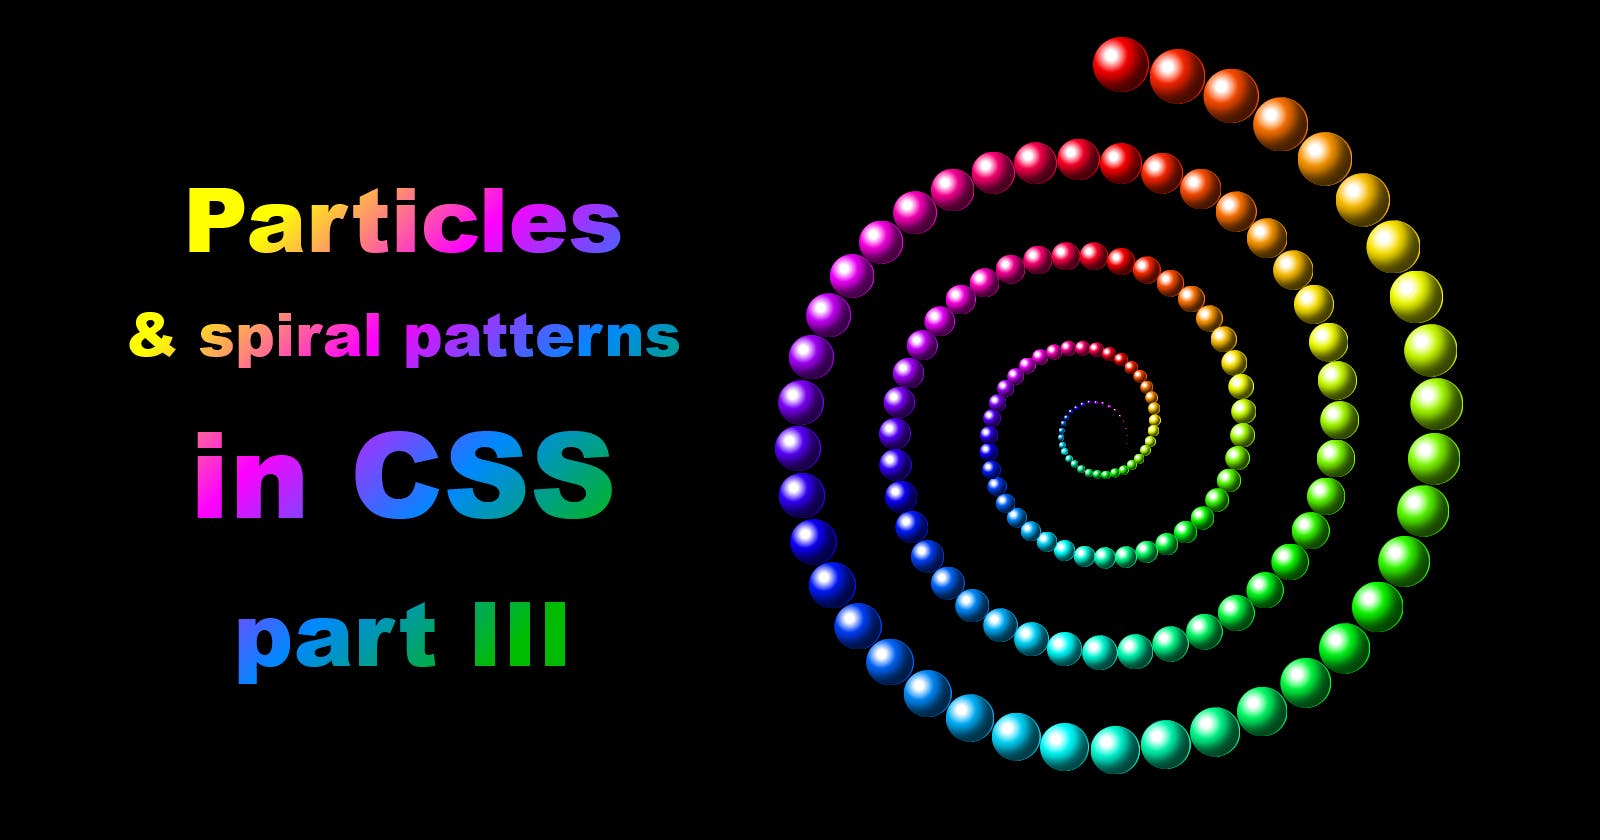 Particles & spiral patterns in CSS: part III